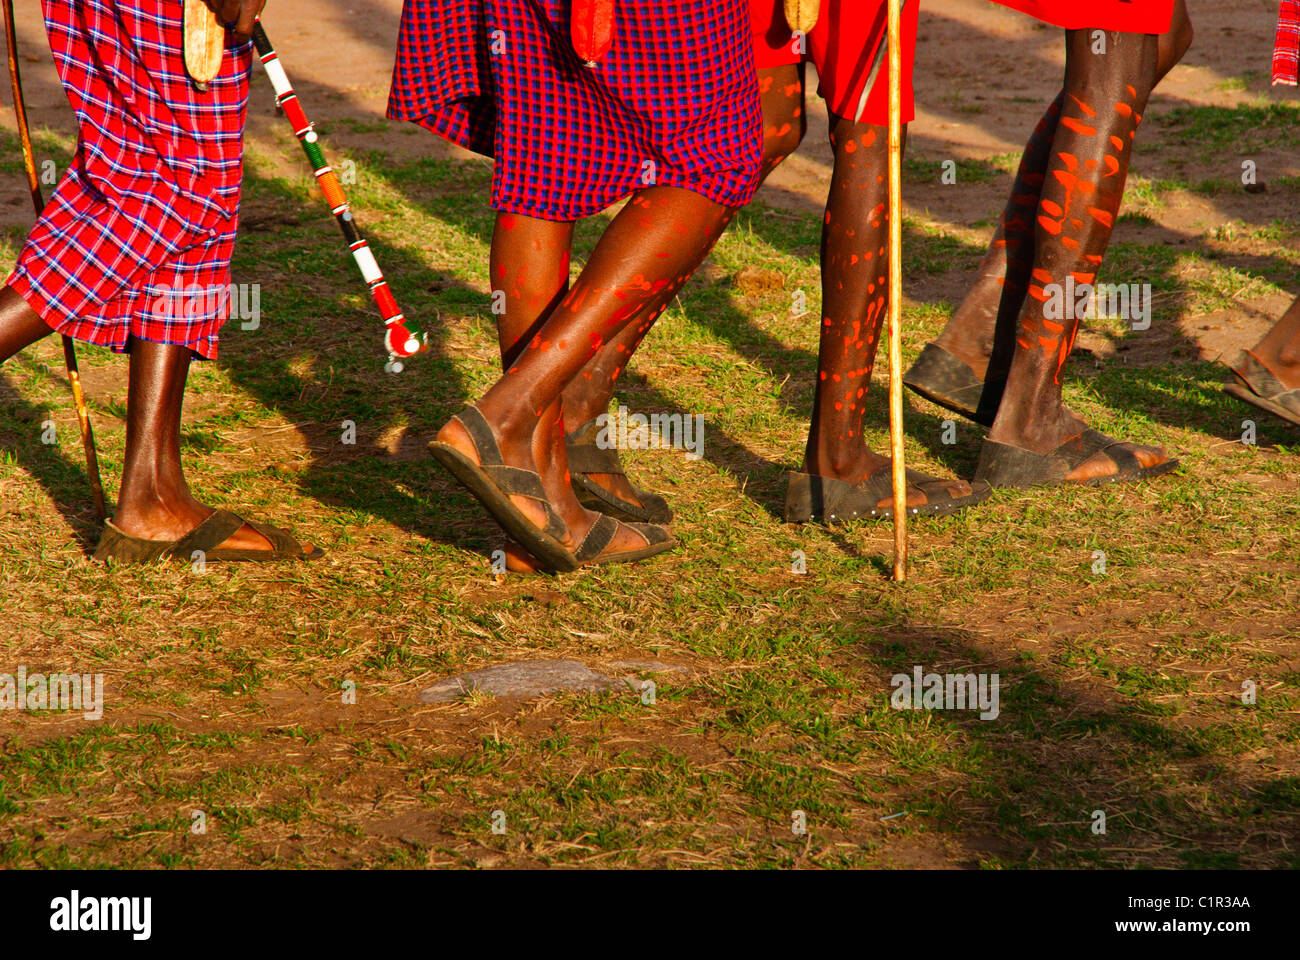 Masai men with decorated legs doing a welcome dance at a village outside the Masai Mara National Reserve, Kenya, Africa Stock Photo